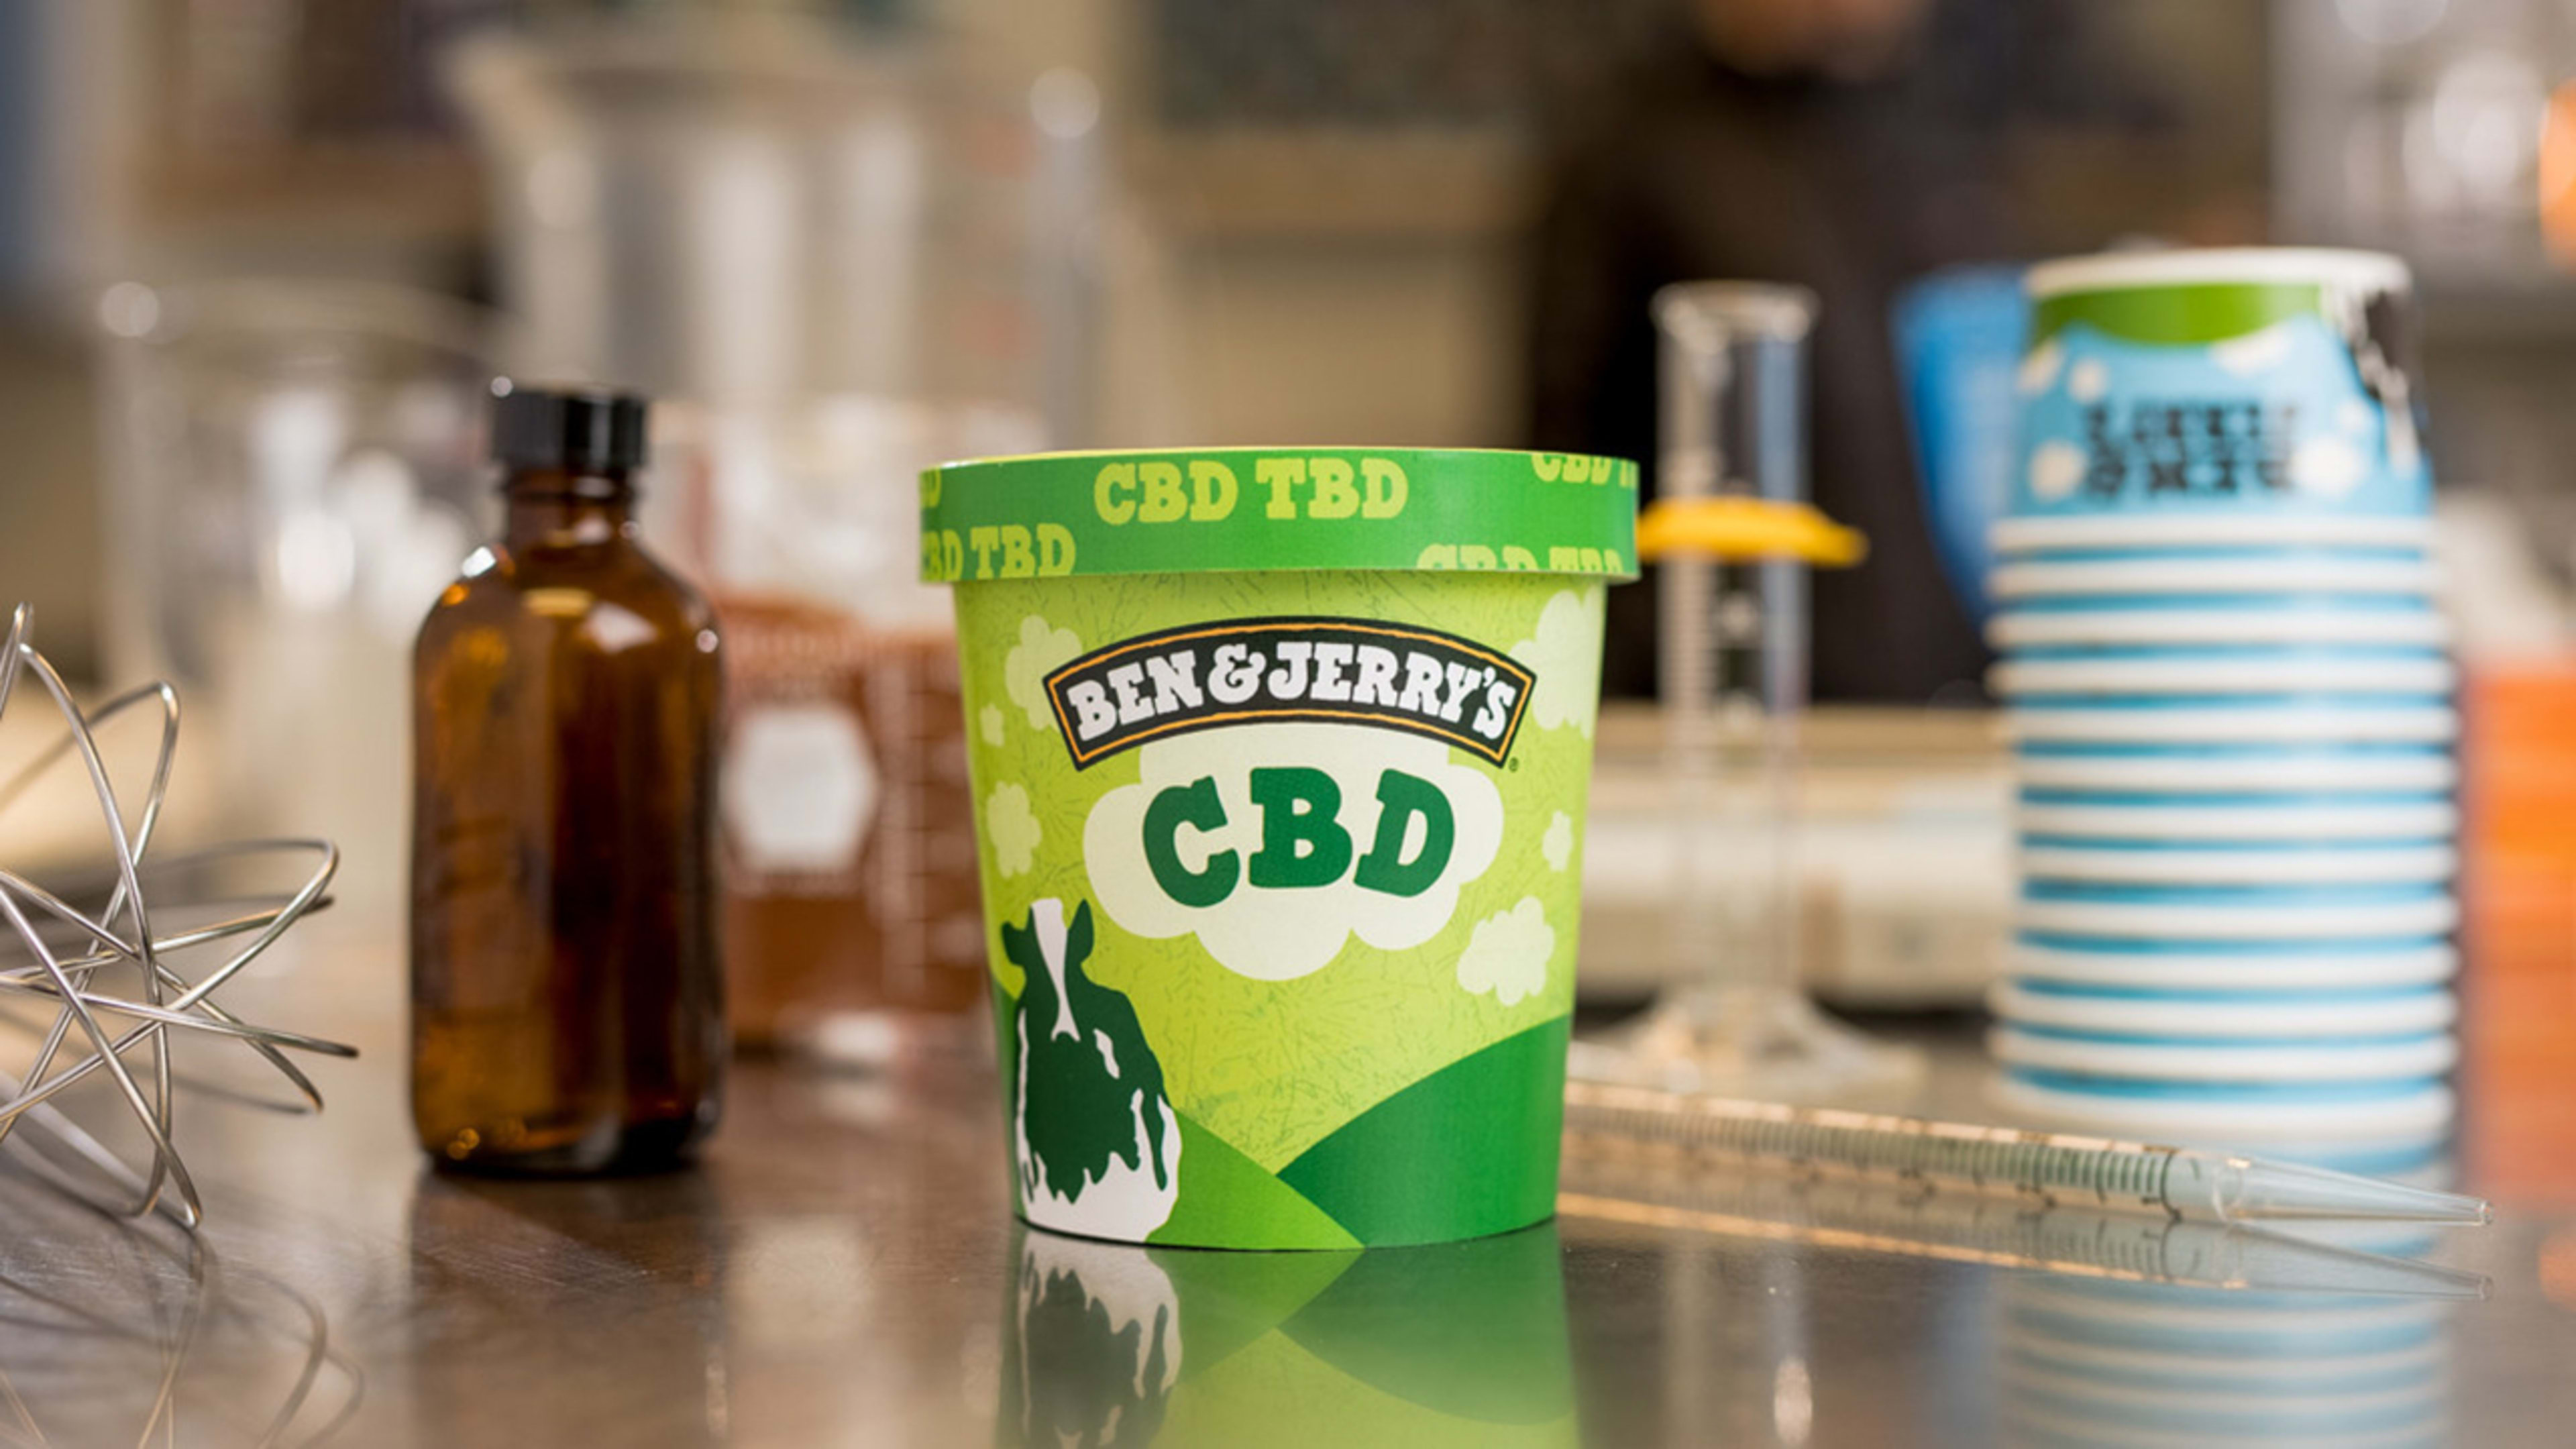 If you want Ben & Jerry’s CBD ice cream to become a reality, do this right now